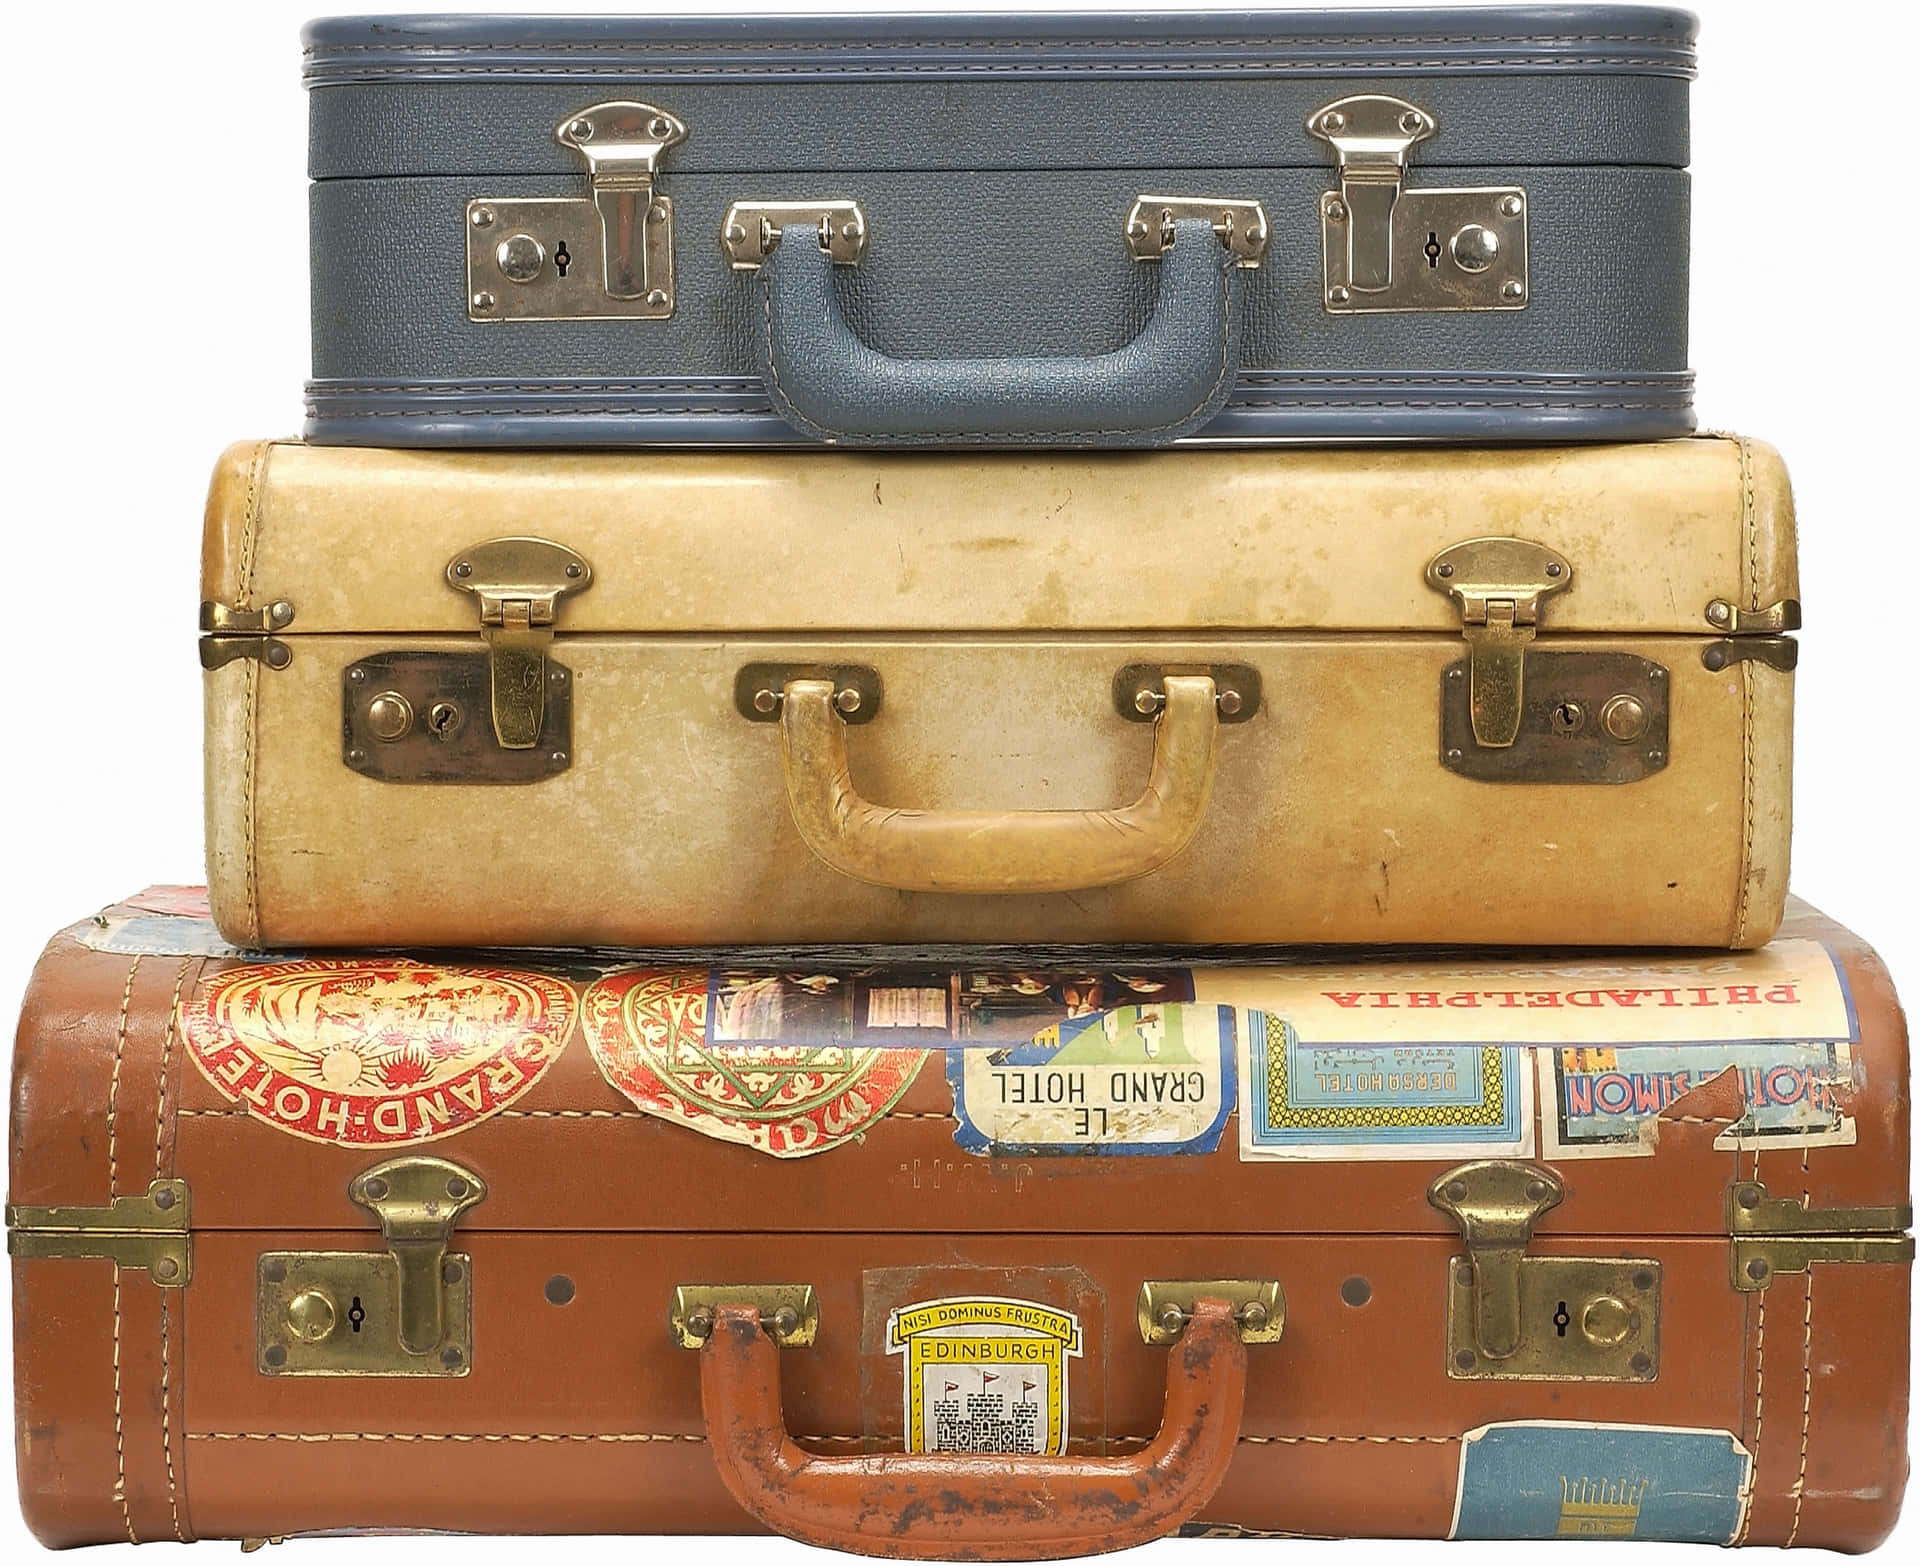 Classically Styled Vintage Luggage Wallpaper